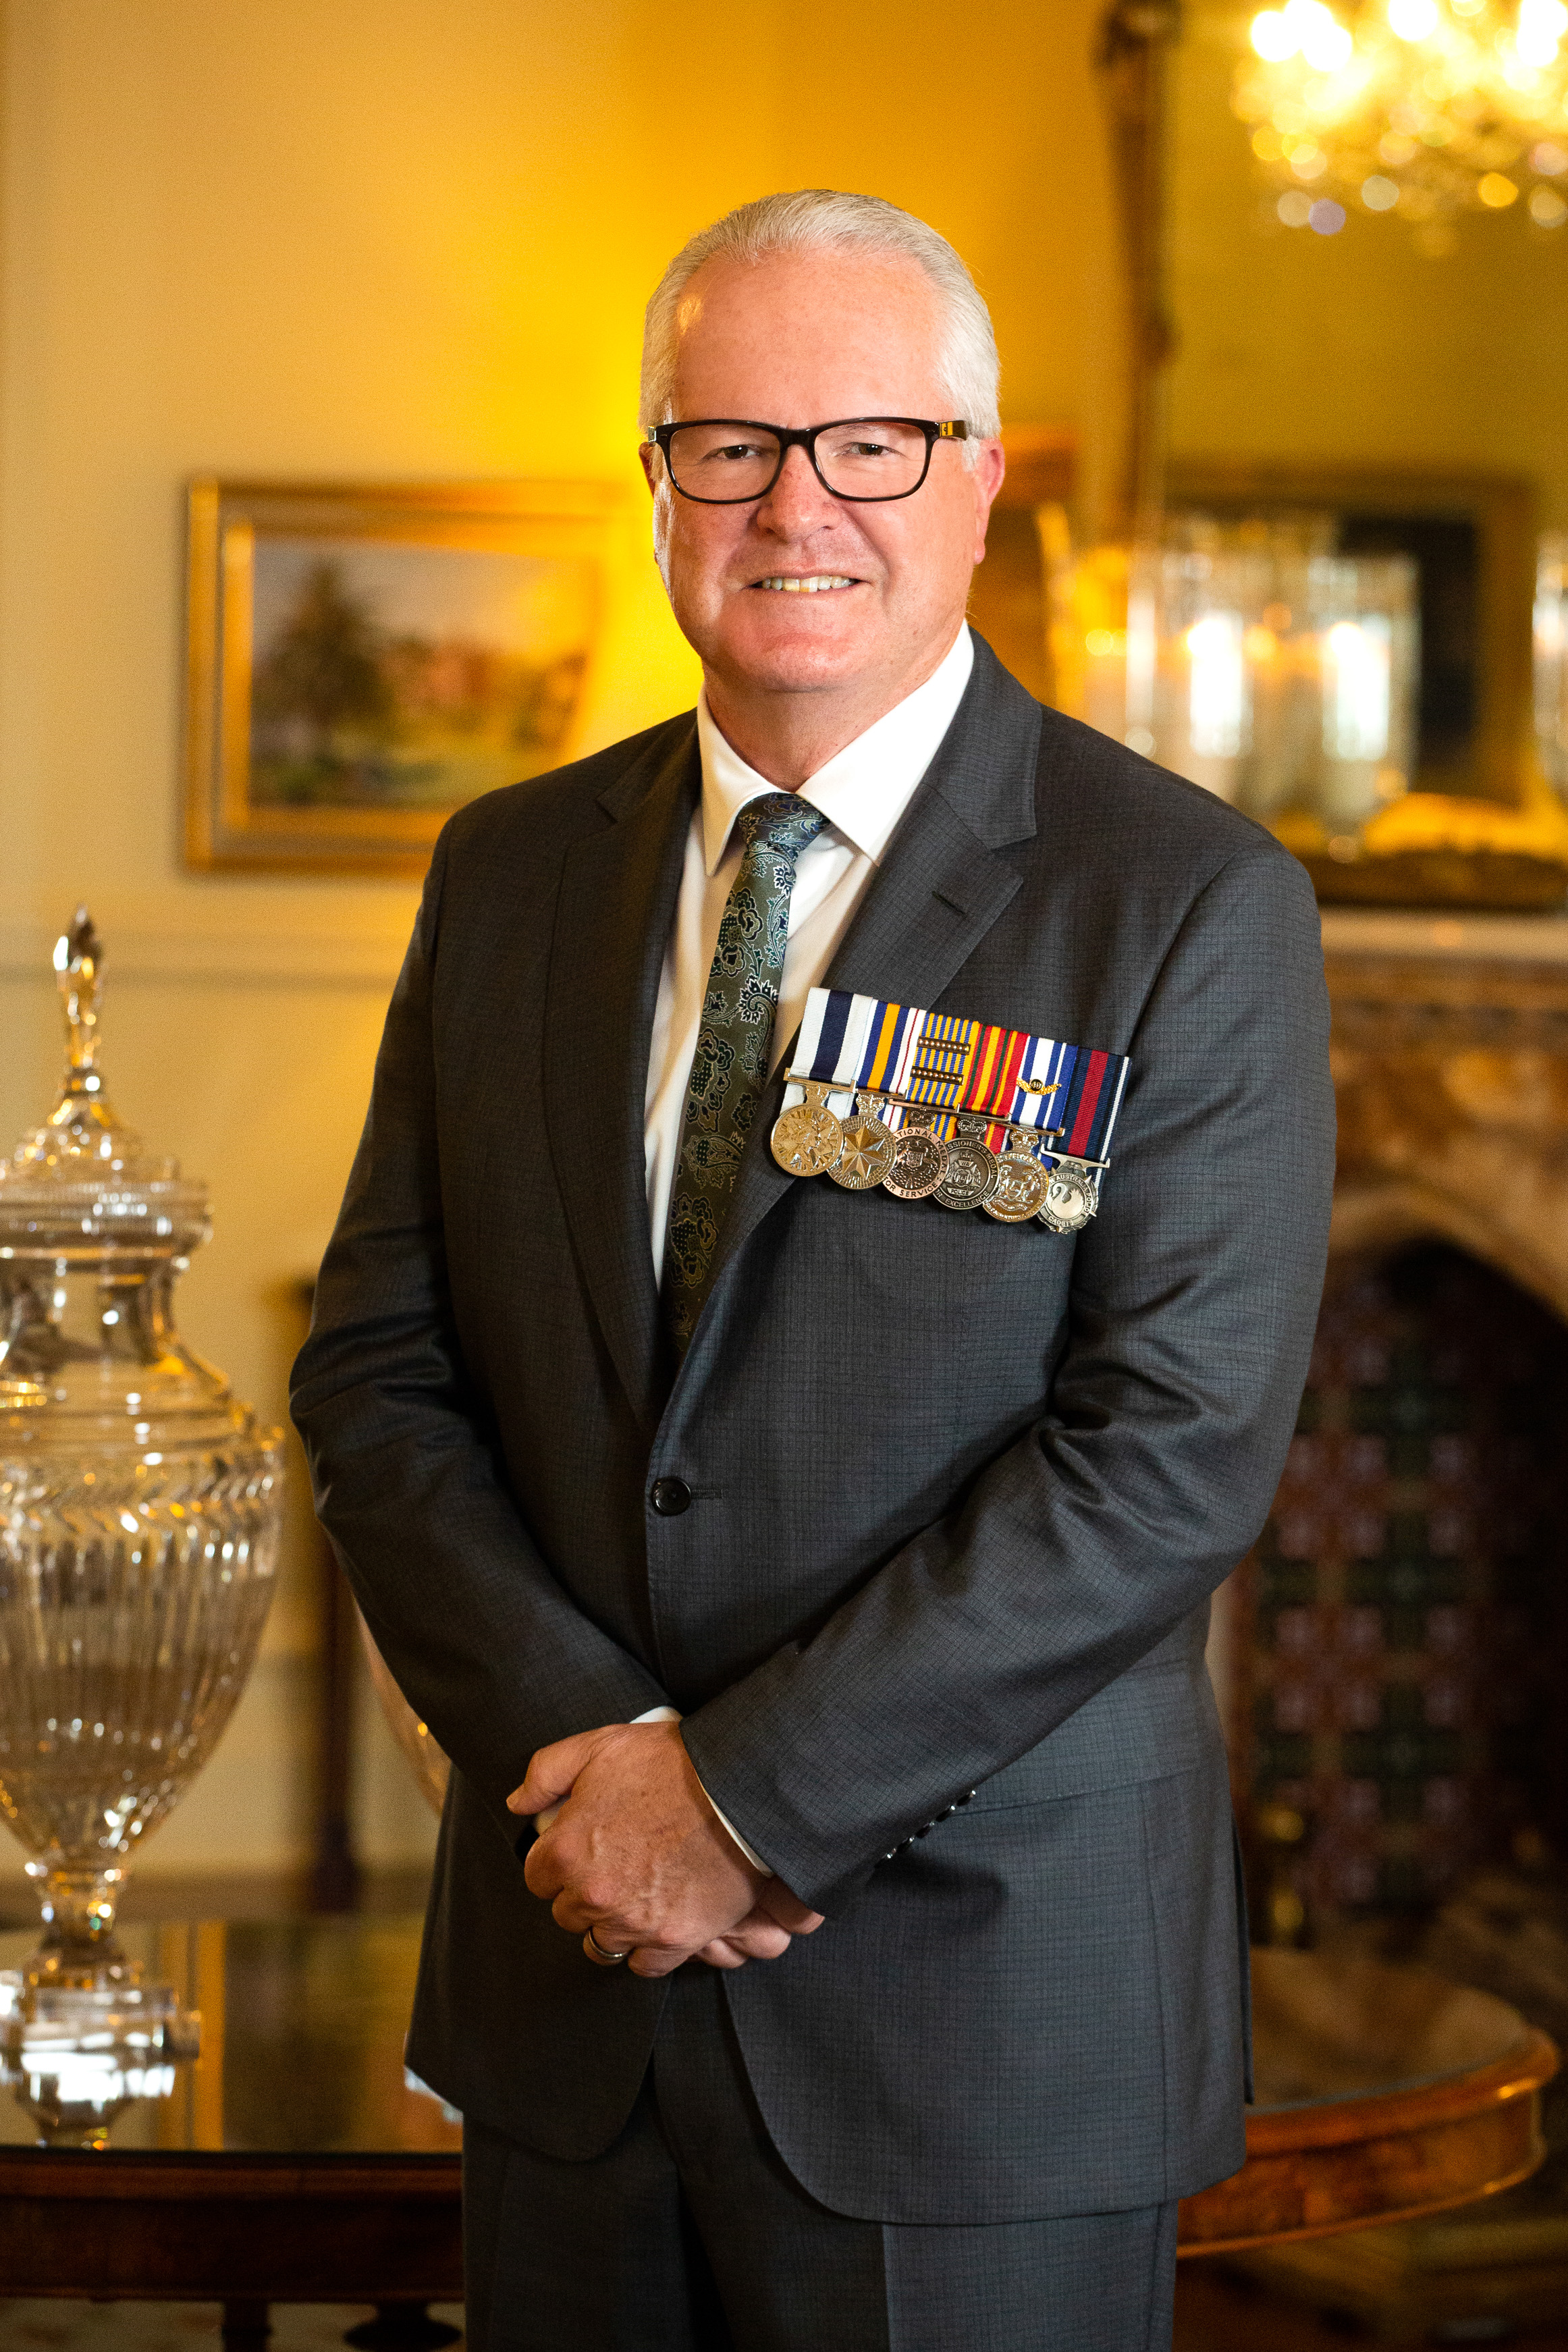 His Excellency the Honourable Christopher John Dawson APM